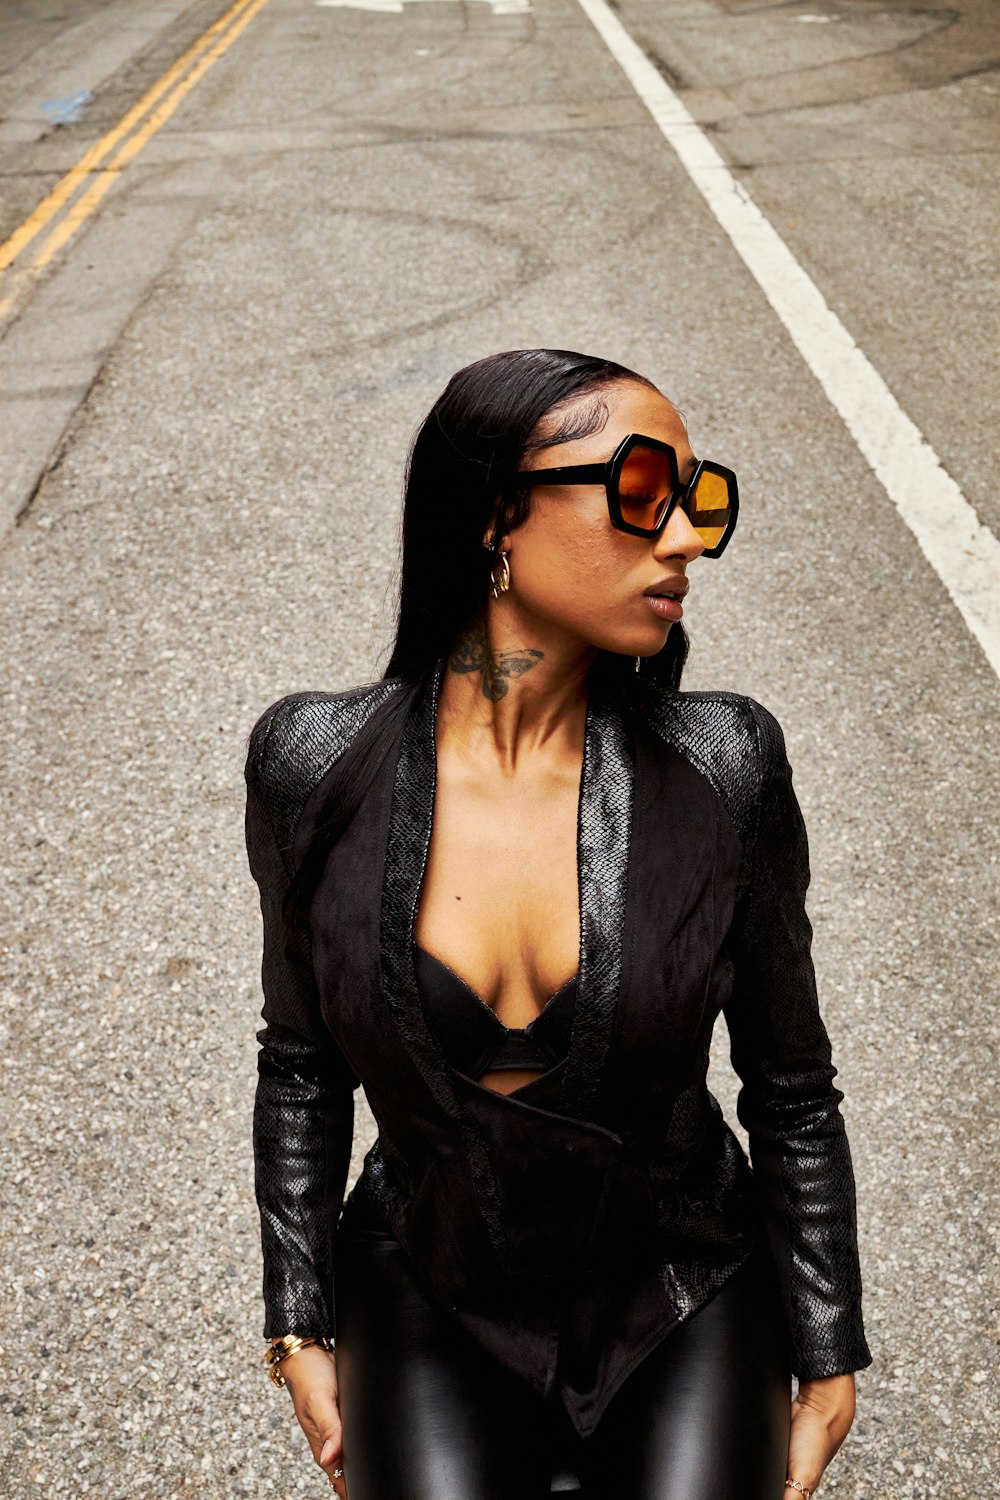 a woman in a black outfit and sunglasses